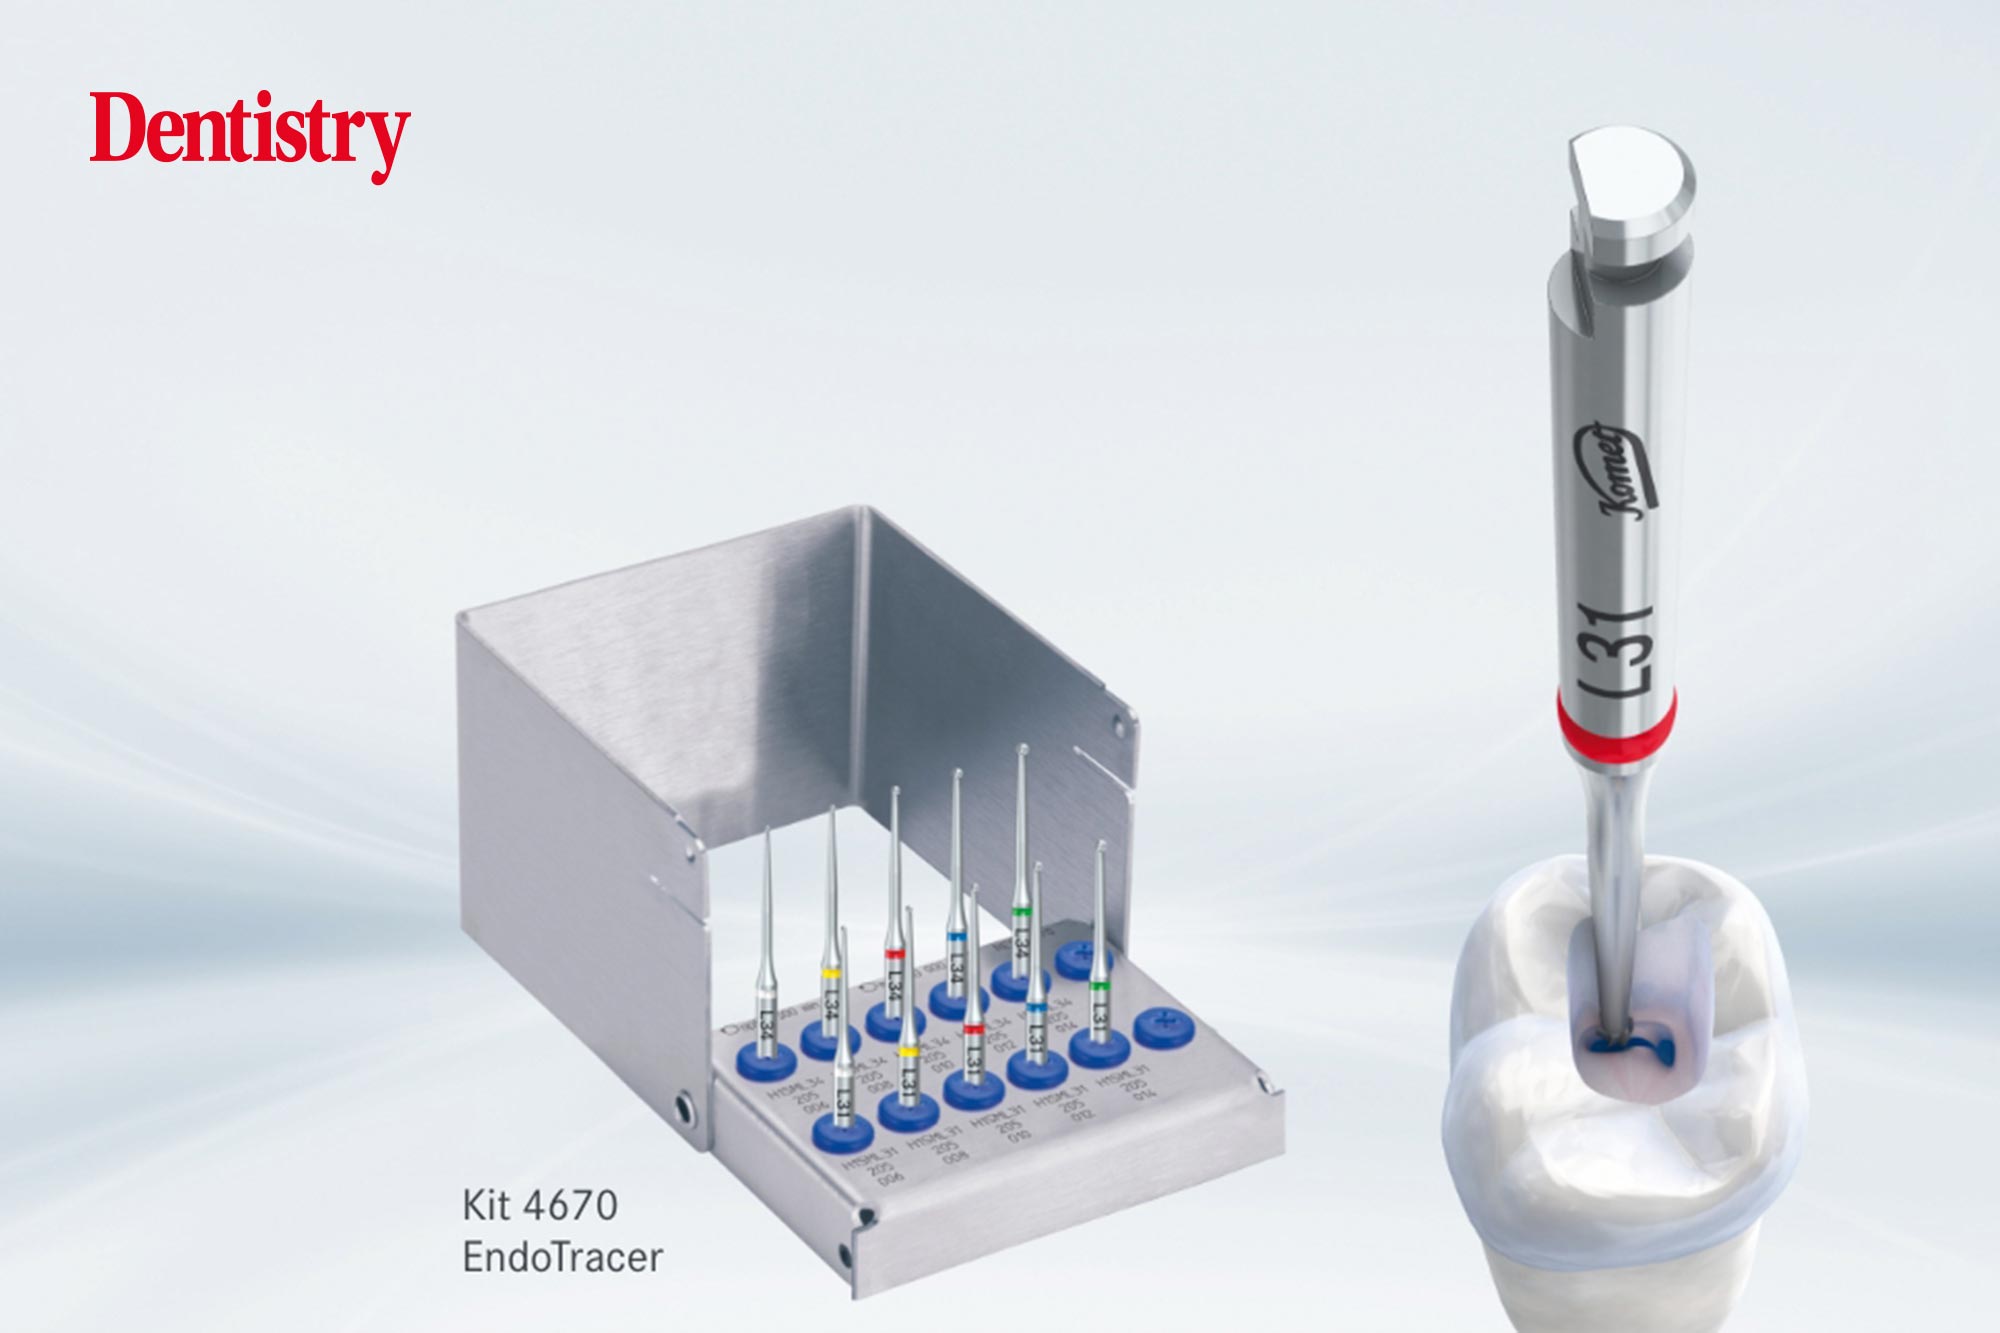 Efficient endodontic treatments with high-quality products from Komet